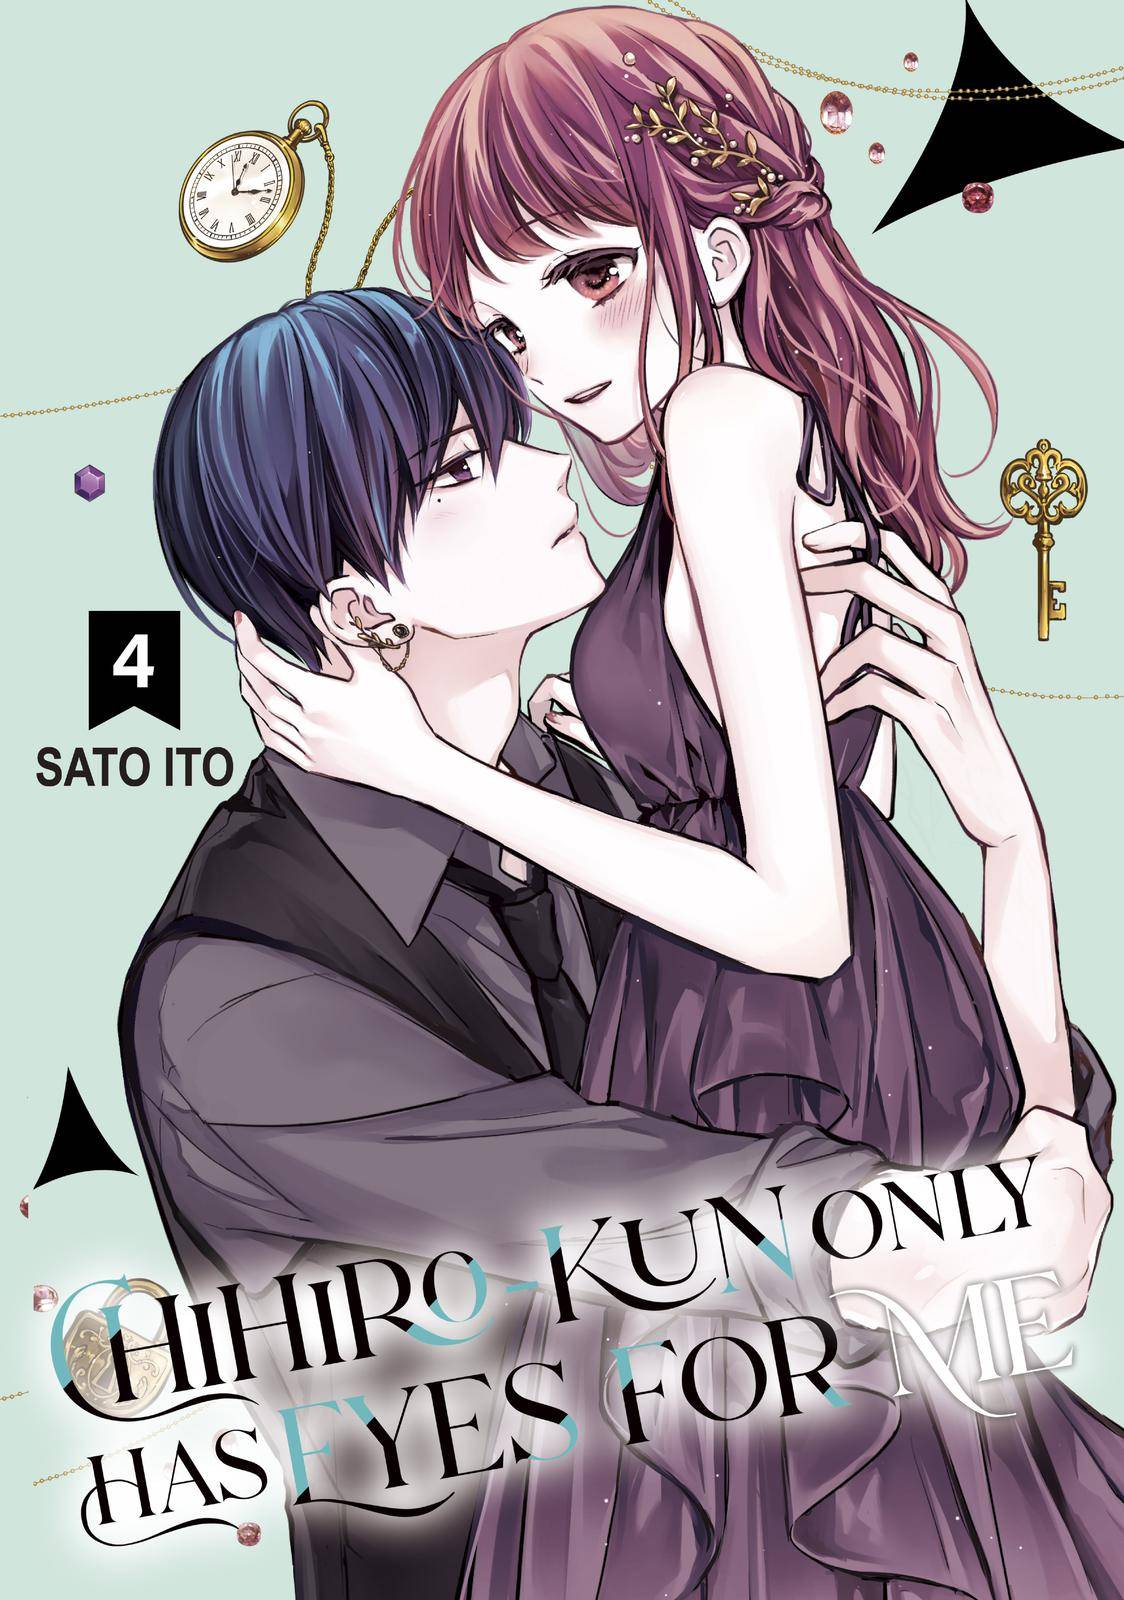 Chihiro-kun Only Has Eyes for Me - chapter 13 - #1